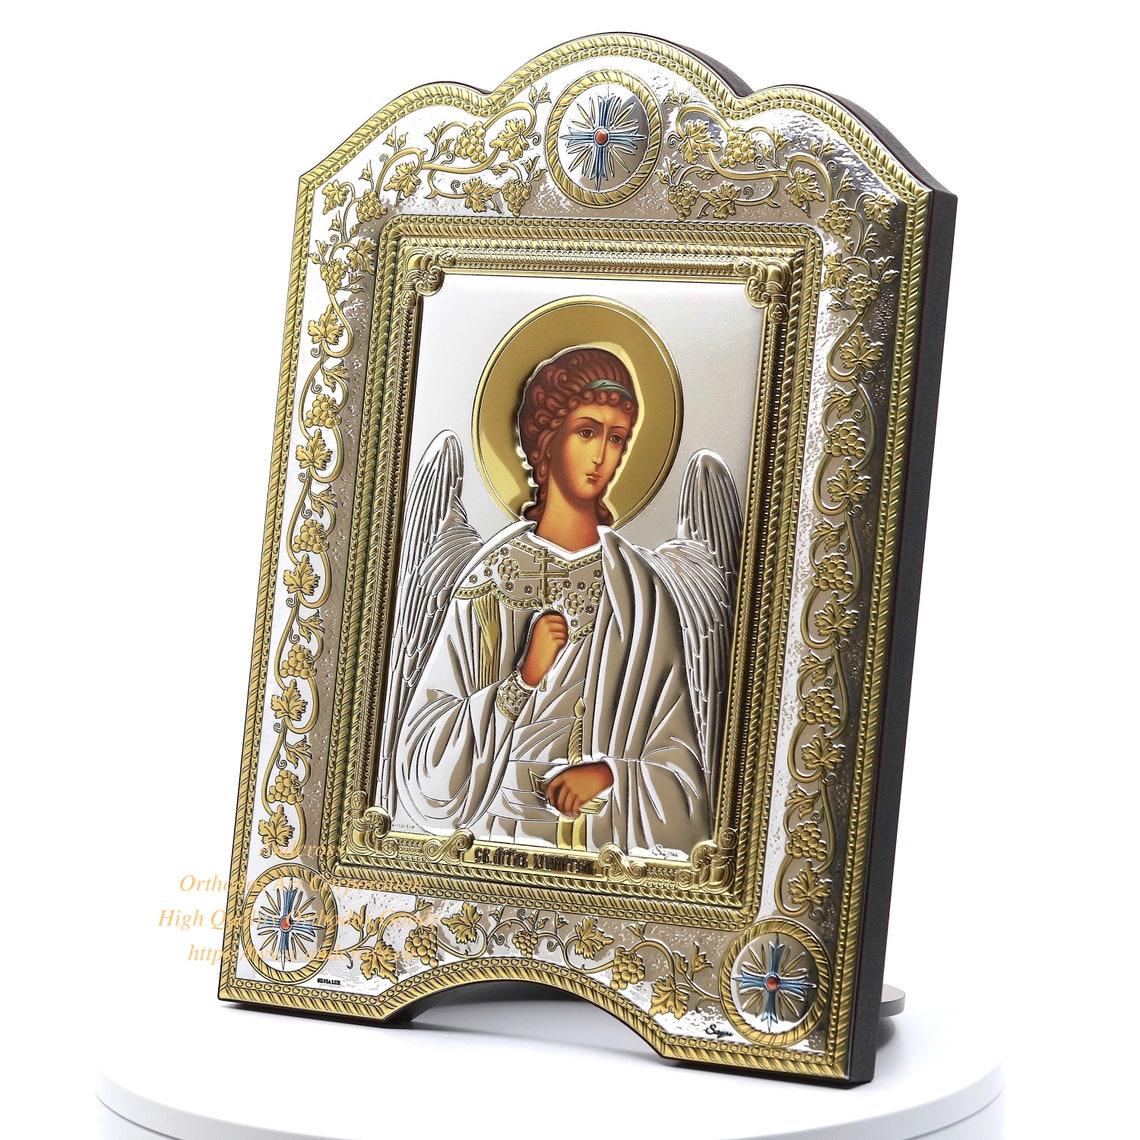 The Great Miraculous Christian Orthodox Silver Icon – The Guardian Angel. 21cmx28cm Gold and silver version. B103|The Great Miraculous Christian Orthodox Silver Icon – The Guardian Angel. 21cmx28cm Gold and silver version. B103|The Great Miraculous Christian Orthodox Silver Icon – The Guardian Angel. 21cmx28cm Gold and silver version. B103|The Great Miraculous Christian Orthodox Silver Icon – The Guardian Angel. 21cmx28cm Gold and silver version. B103|The Great Miraculous Christian Orthodox Silver Icon – The Guardian Angel. 21cmx28cm Gold and silver version. B103|The Great Miraculous Christian Orthodox Silver Icon – The Guardian Angel. 21cmx28cm Gold and silver version. B103